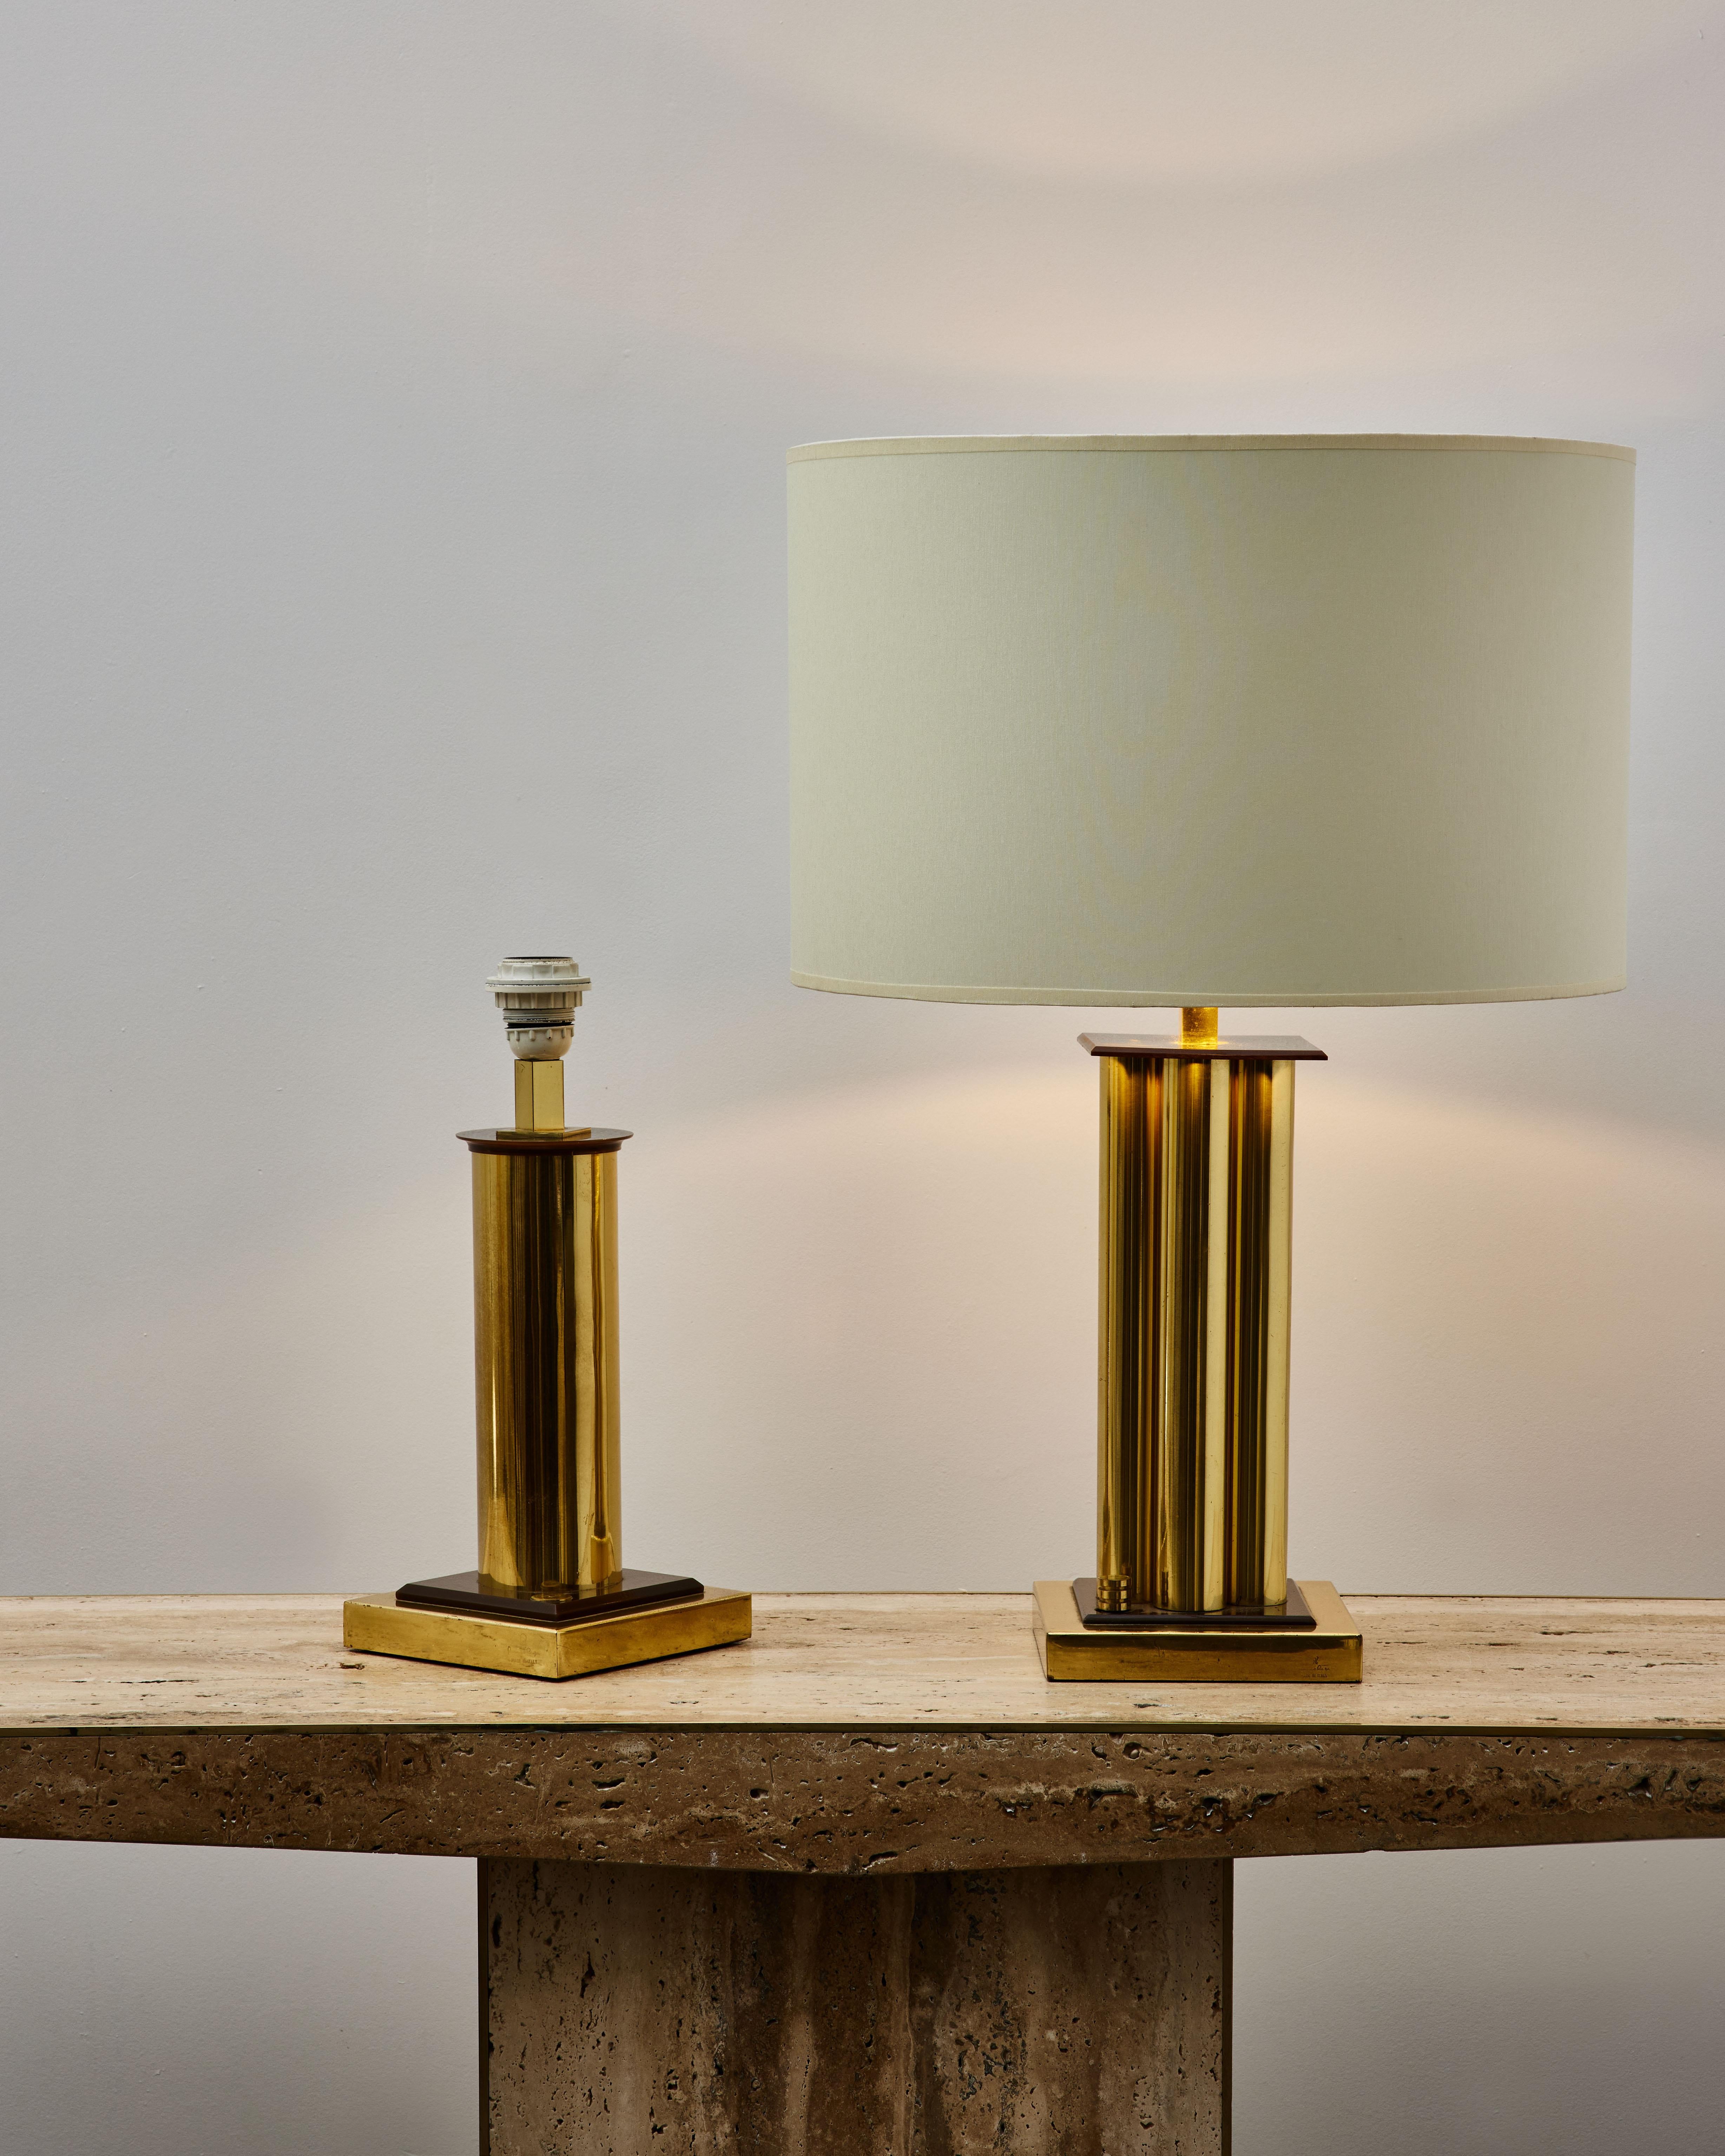 Rare pair of table lamps in brass, signed by the artist Romeo Rega.
Rewired. Italy, 1970s.

Price and dimensions without shades.